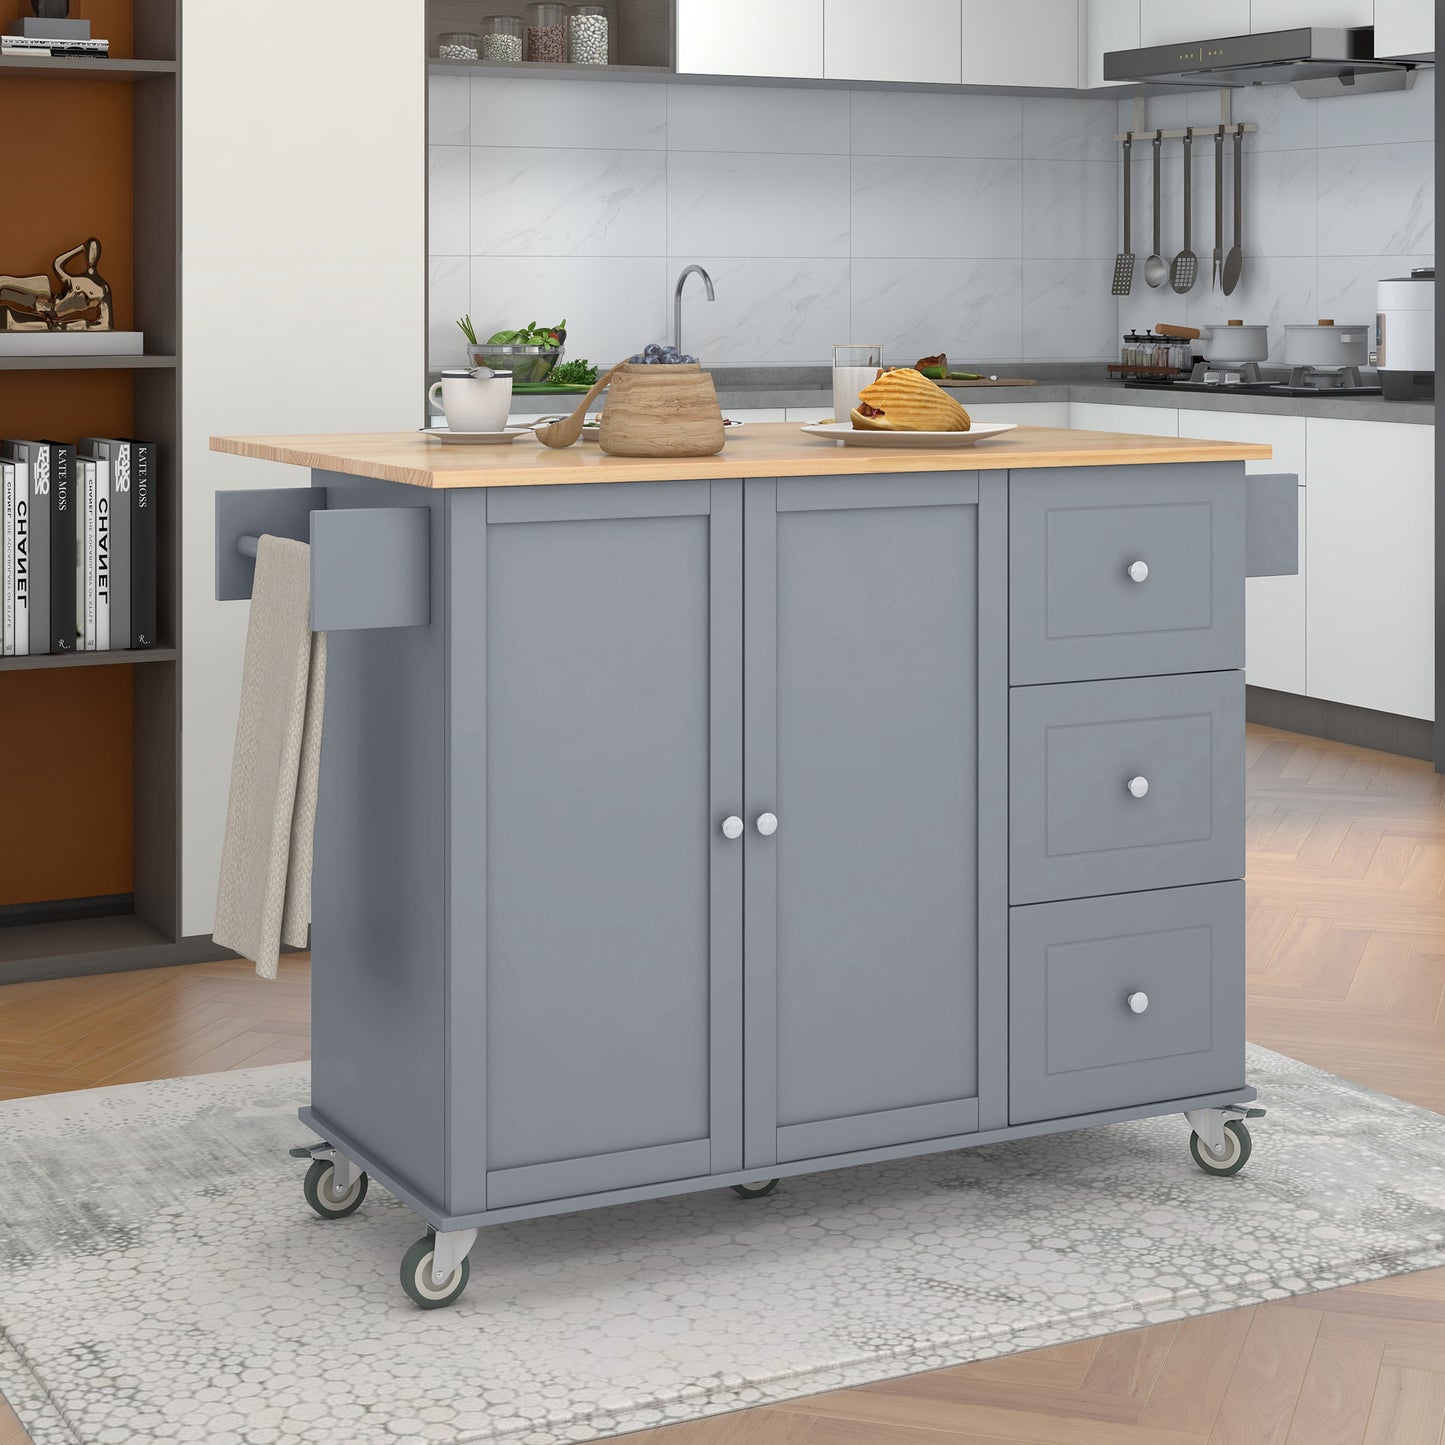 Rolling Mobile Kitchen Island with Solid Wood Top and Locking Wheels,52.7 Inch Width,Storage Cabinet and Drop Leaf Breakfast Bar,Spice Rack, Towel Rack & Drawer (Grey Blue)